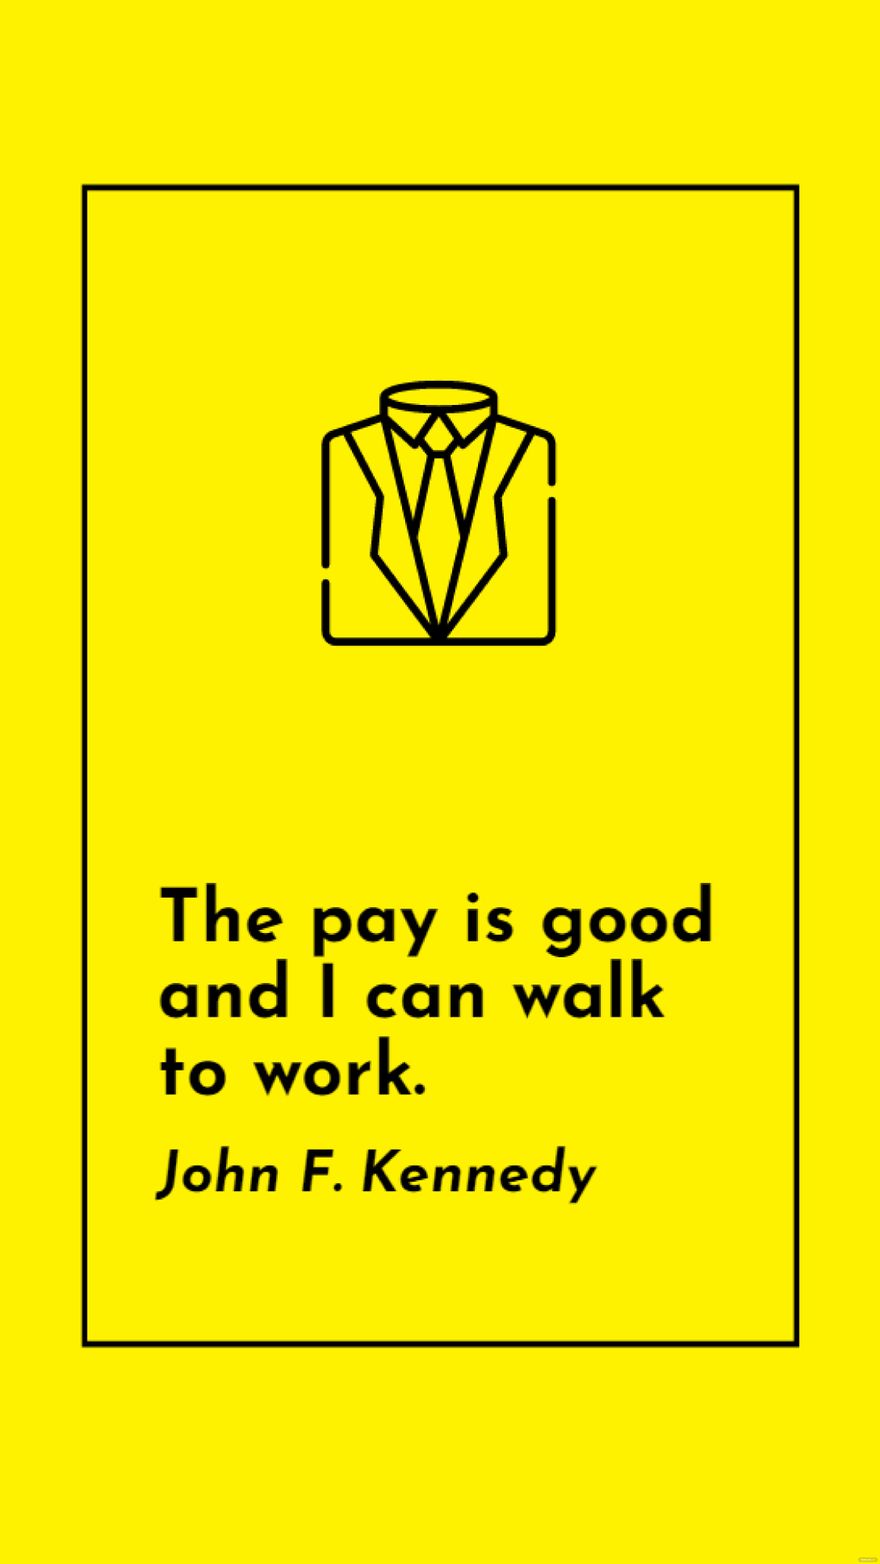 John F. Kennedy - The pay is good and I can walk to work. in JPG